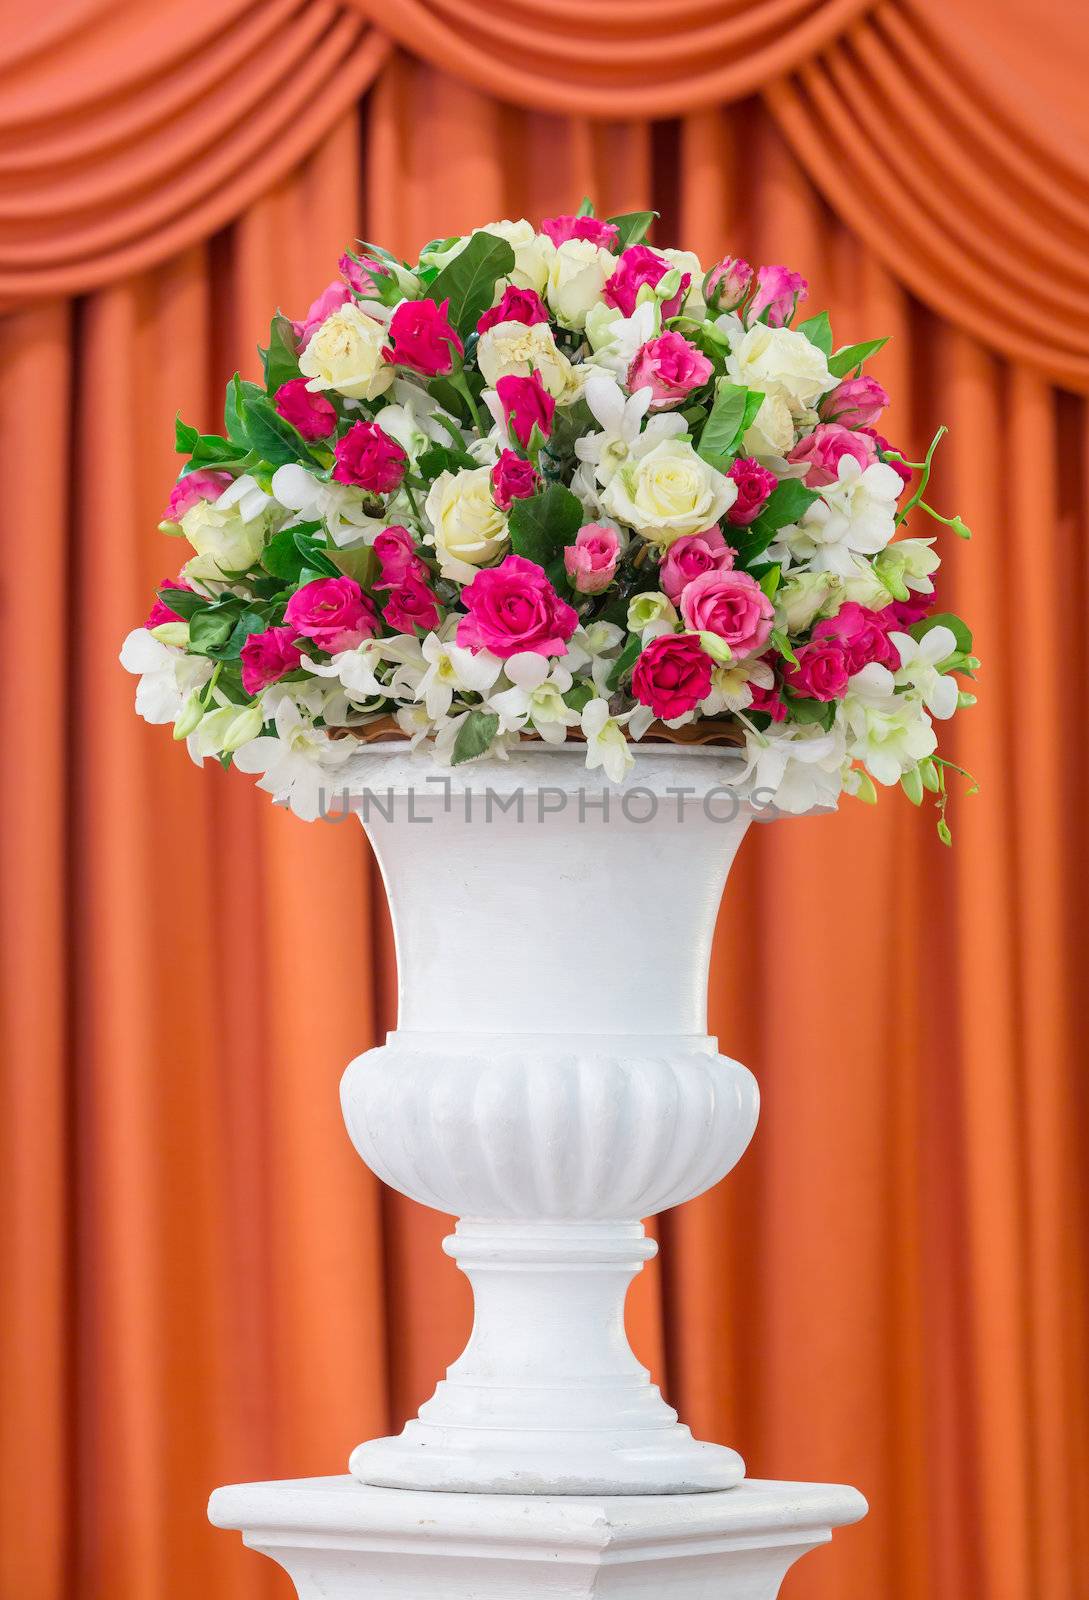 Bouquet of flowers in old fashion vase isolated on red curtain